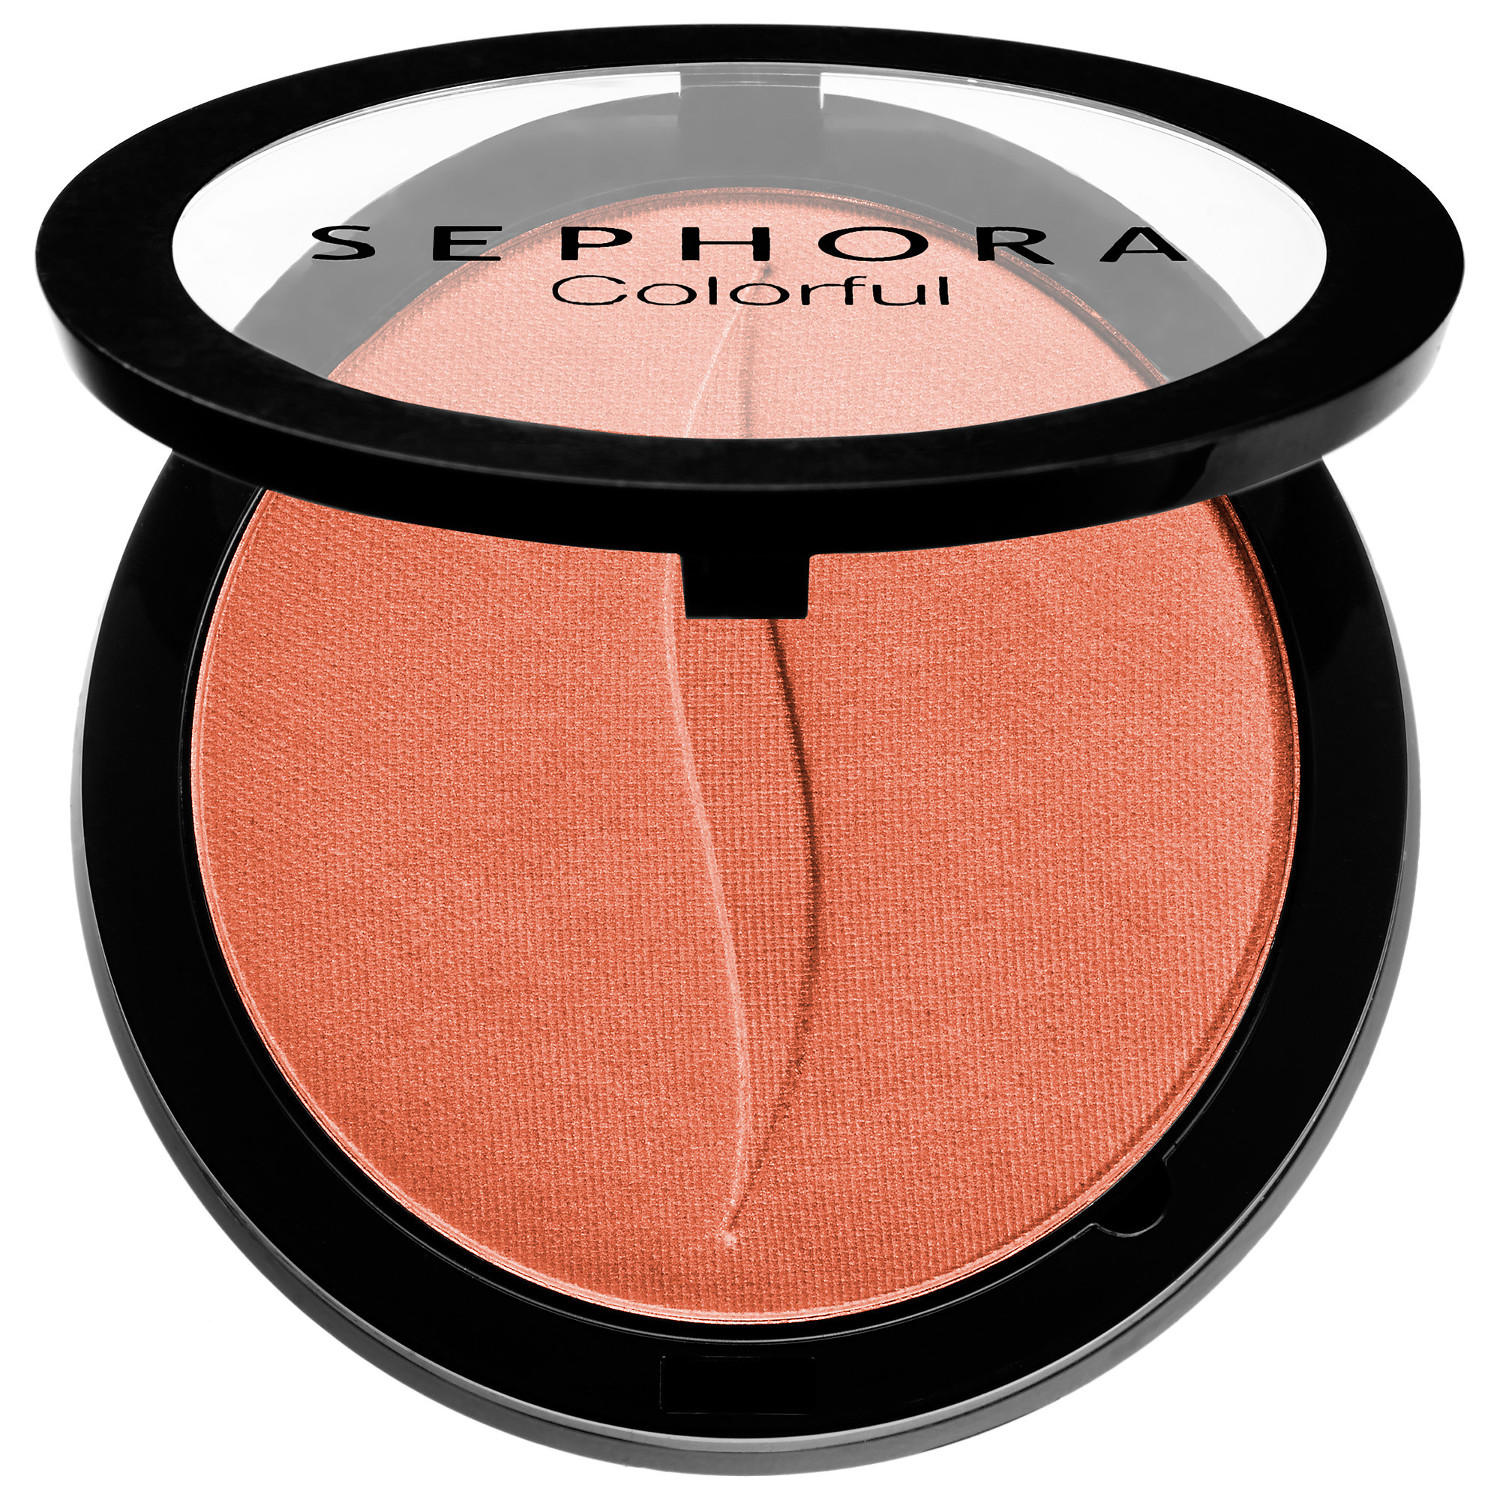 Sephora Colorful Face Powders Blush Charmed No. 27